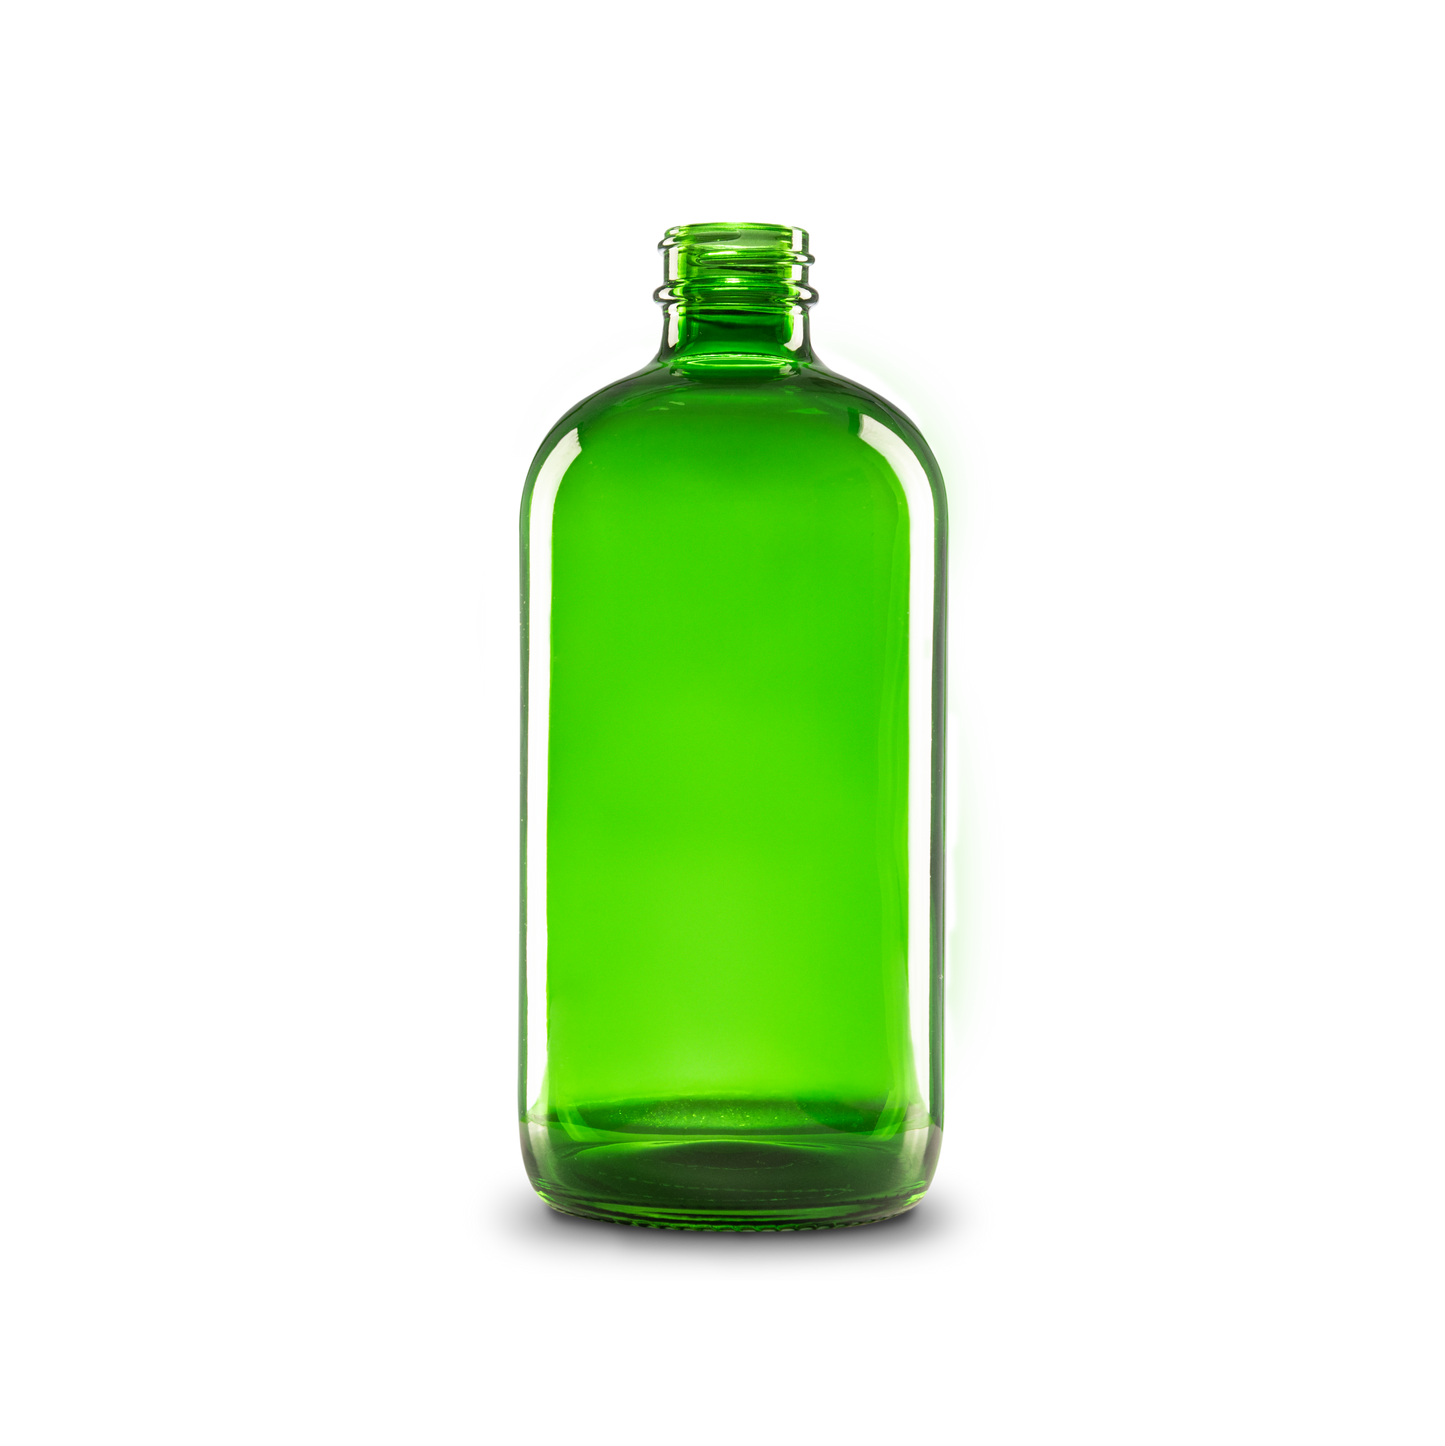 16 oz green glass bottles are perfect for storing liquids. the larger size also makes them perfect for DIY projects such as soap and candles